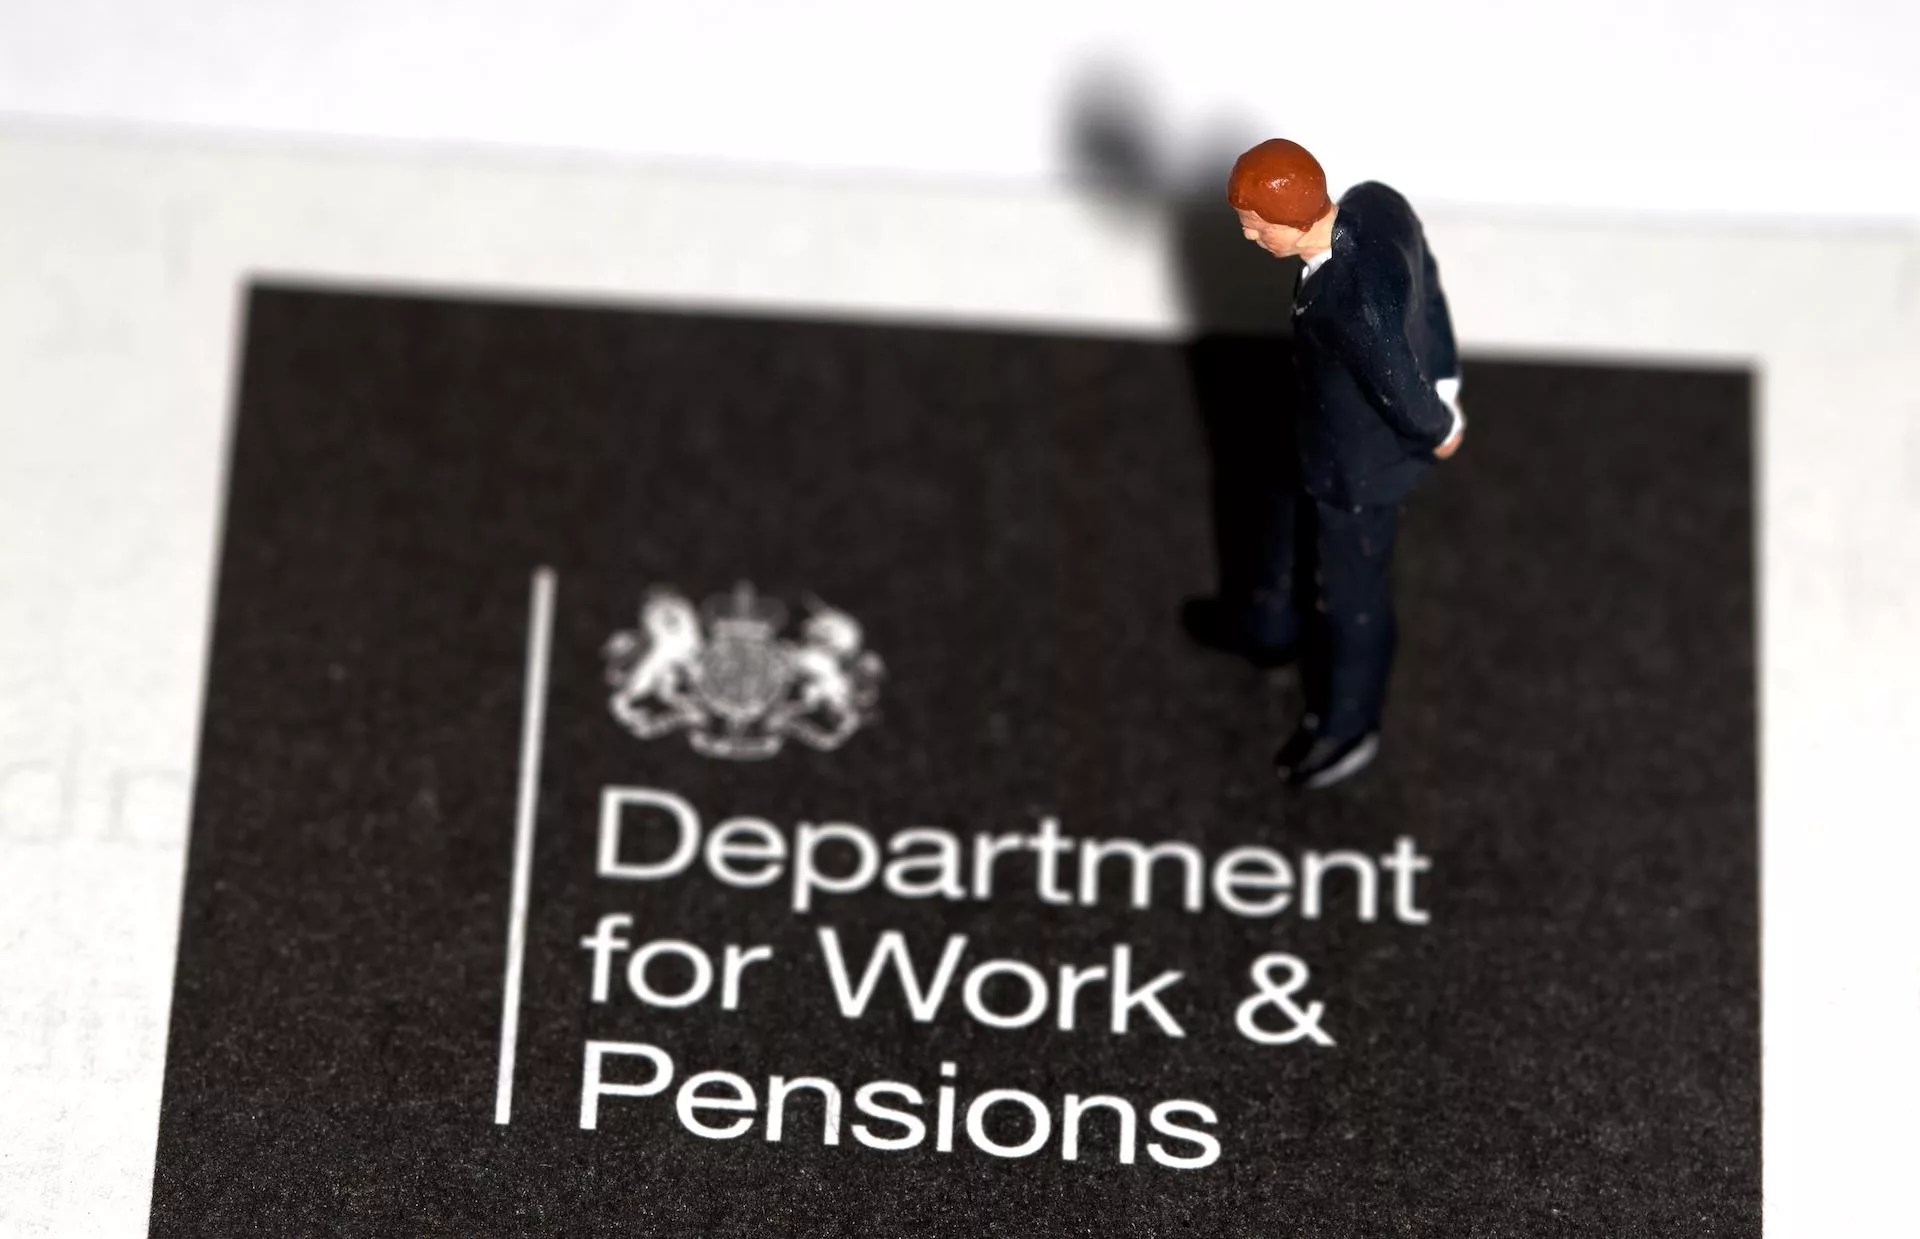 A miniature figurine businessman looking down on an information booklet for department for work and pensions